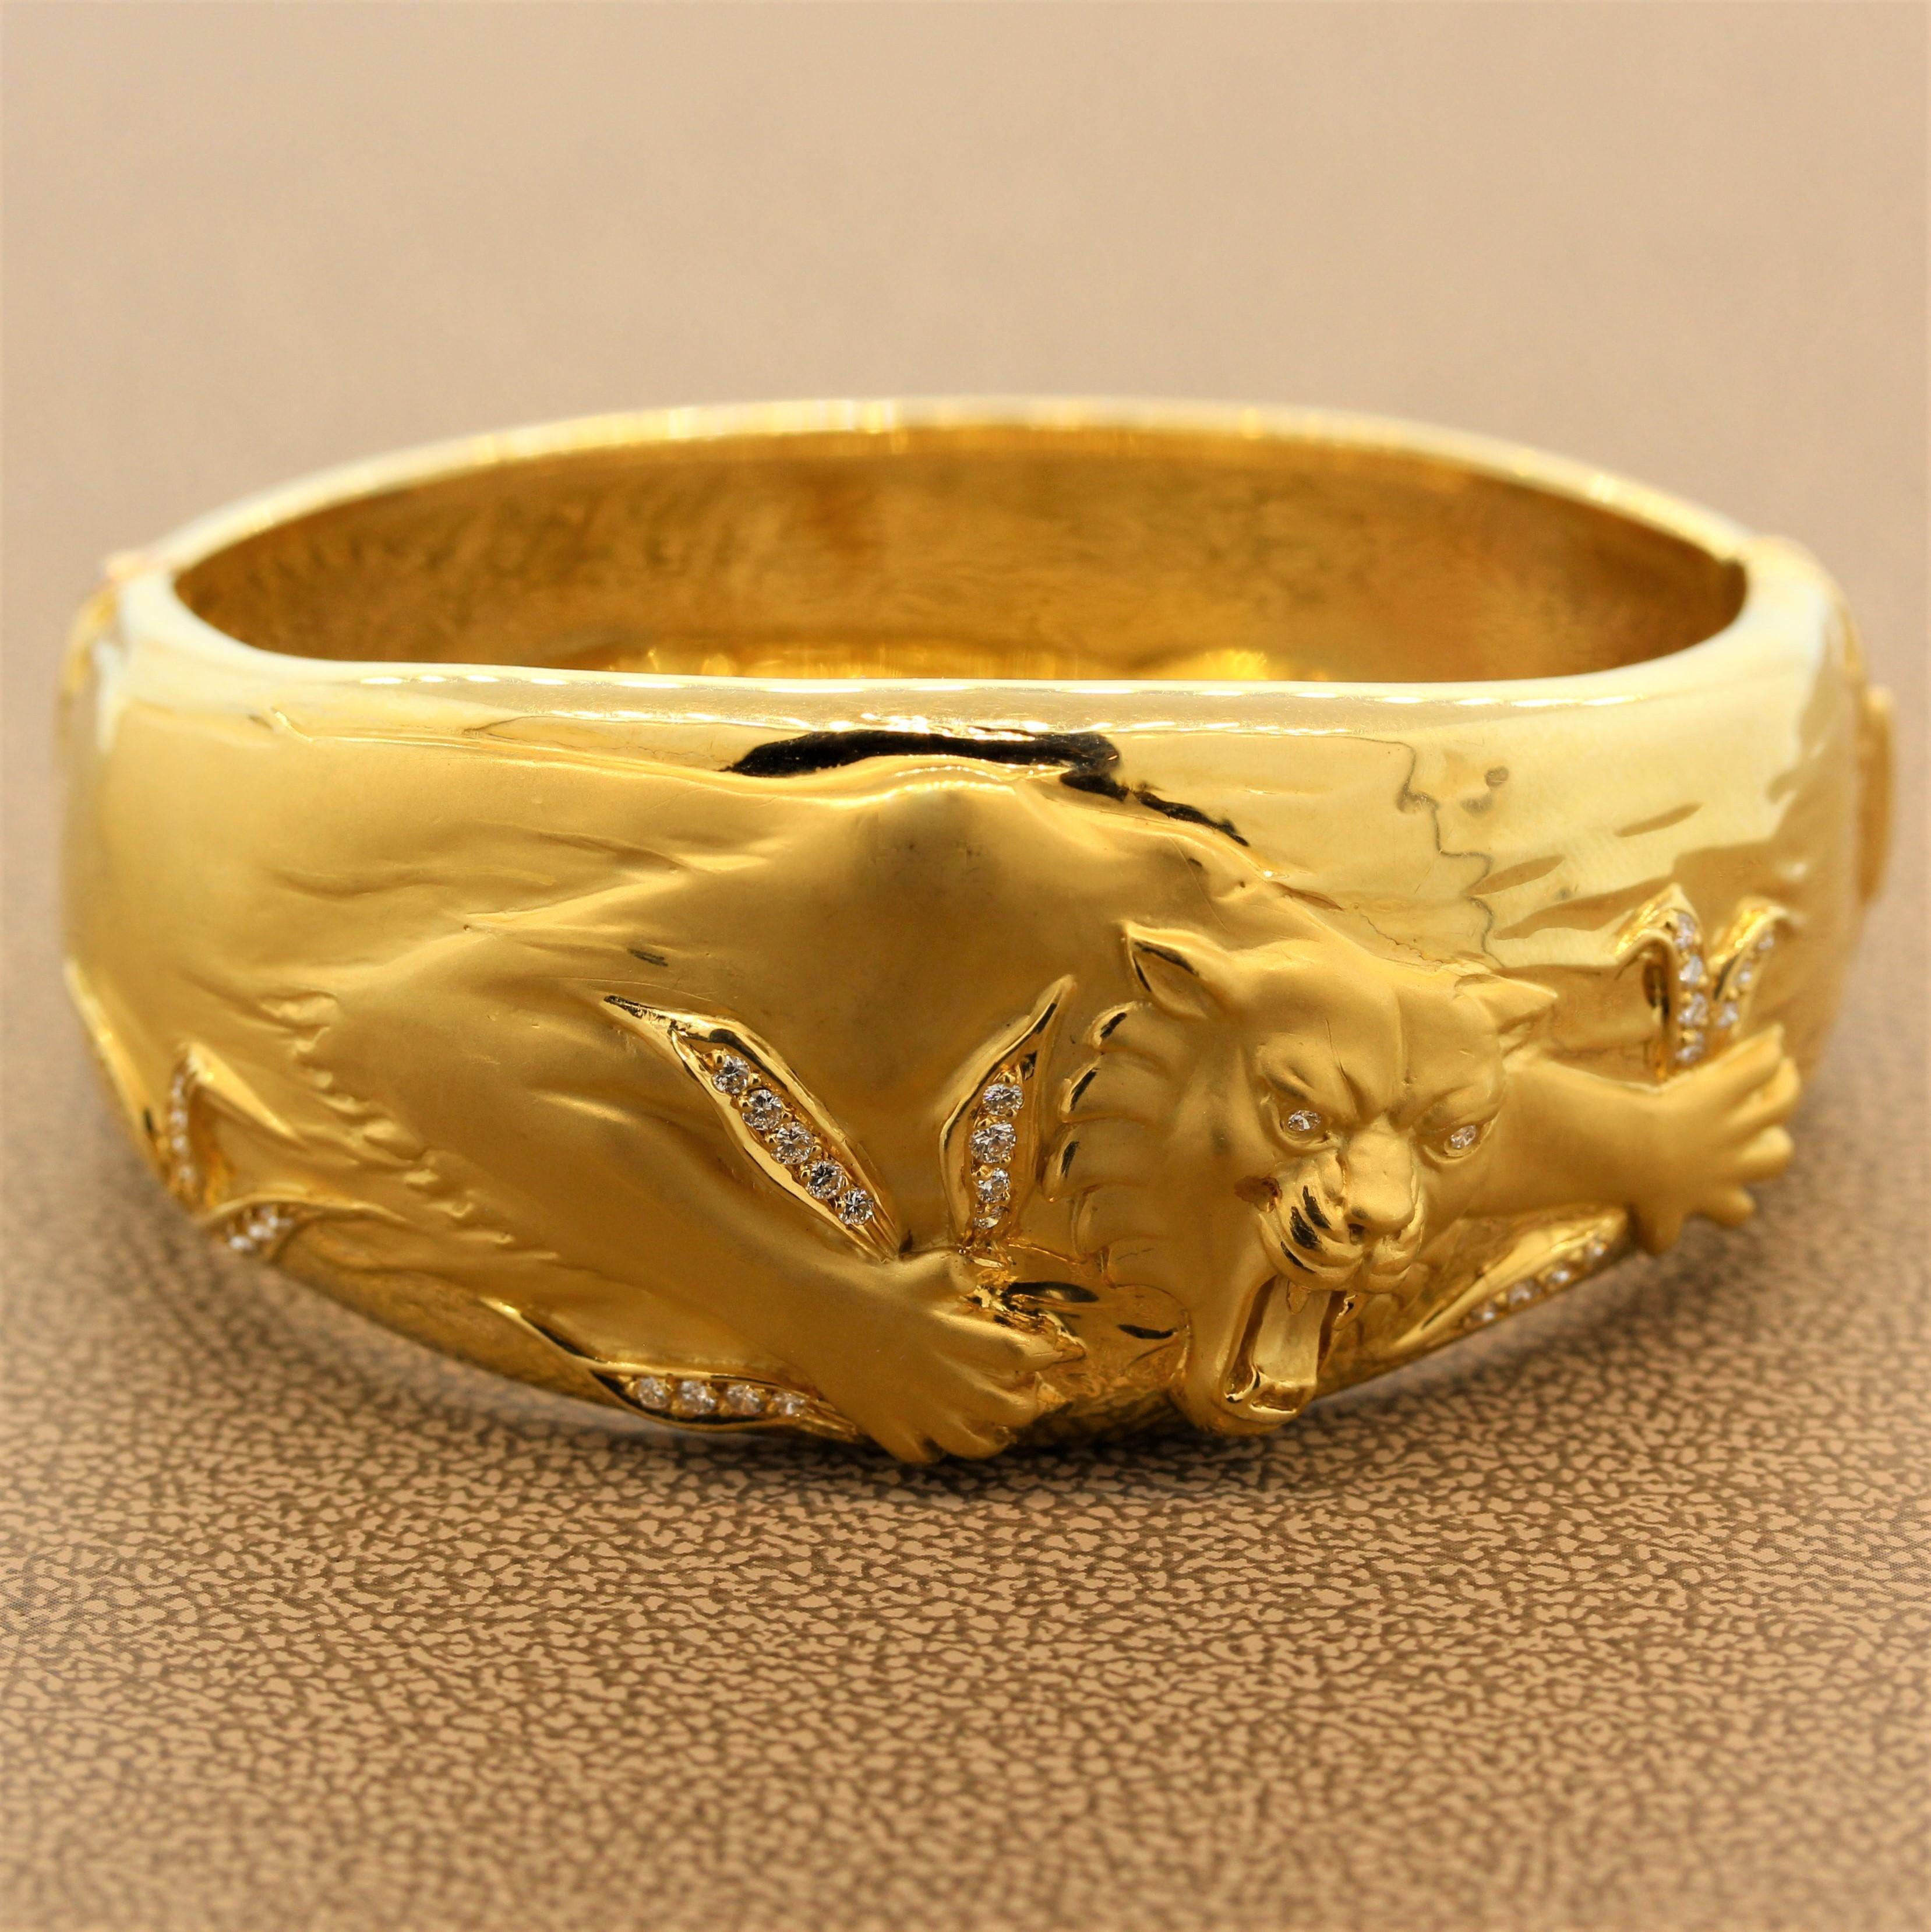 A fierce creation by Spanish jewelry house Carrera y Carrera. The bracelet depicts a strong panther leaping on the attack. It is complemented by diamond studded tall grass which branch across the bracelet. Made in 18K yellow gold this designer